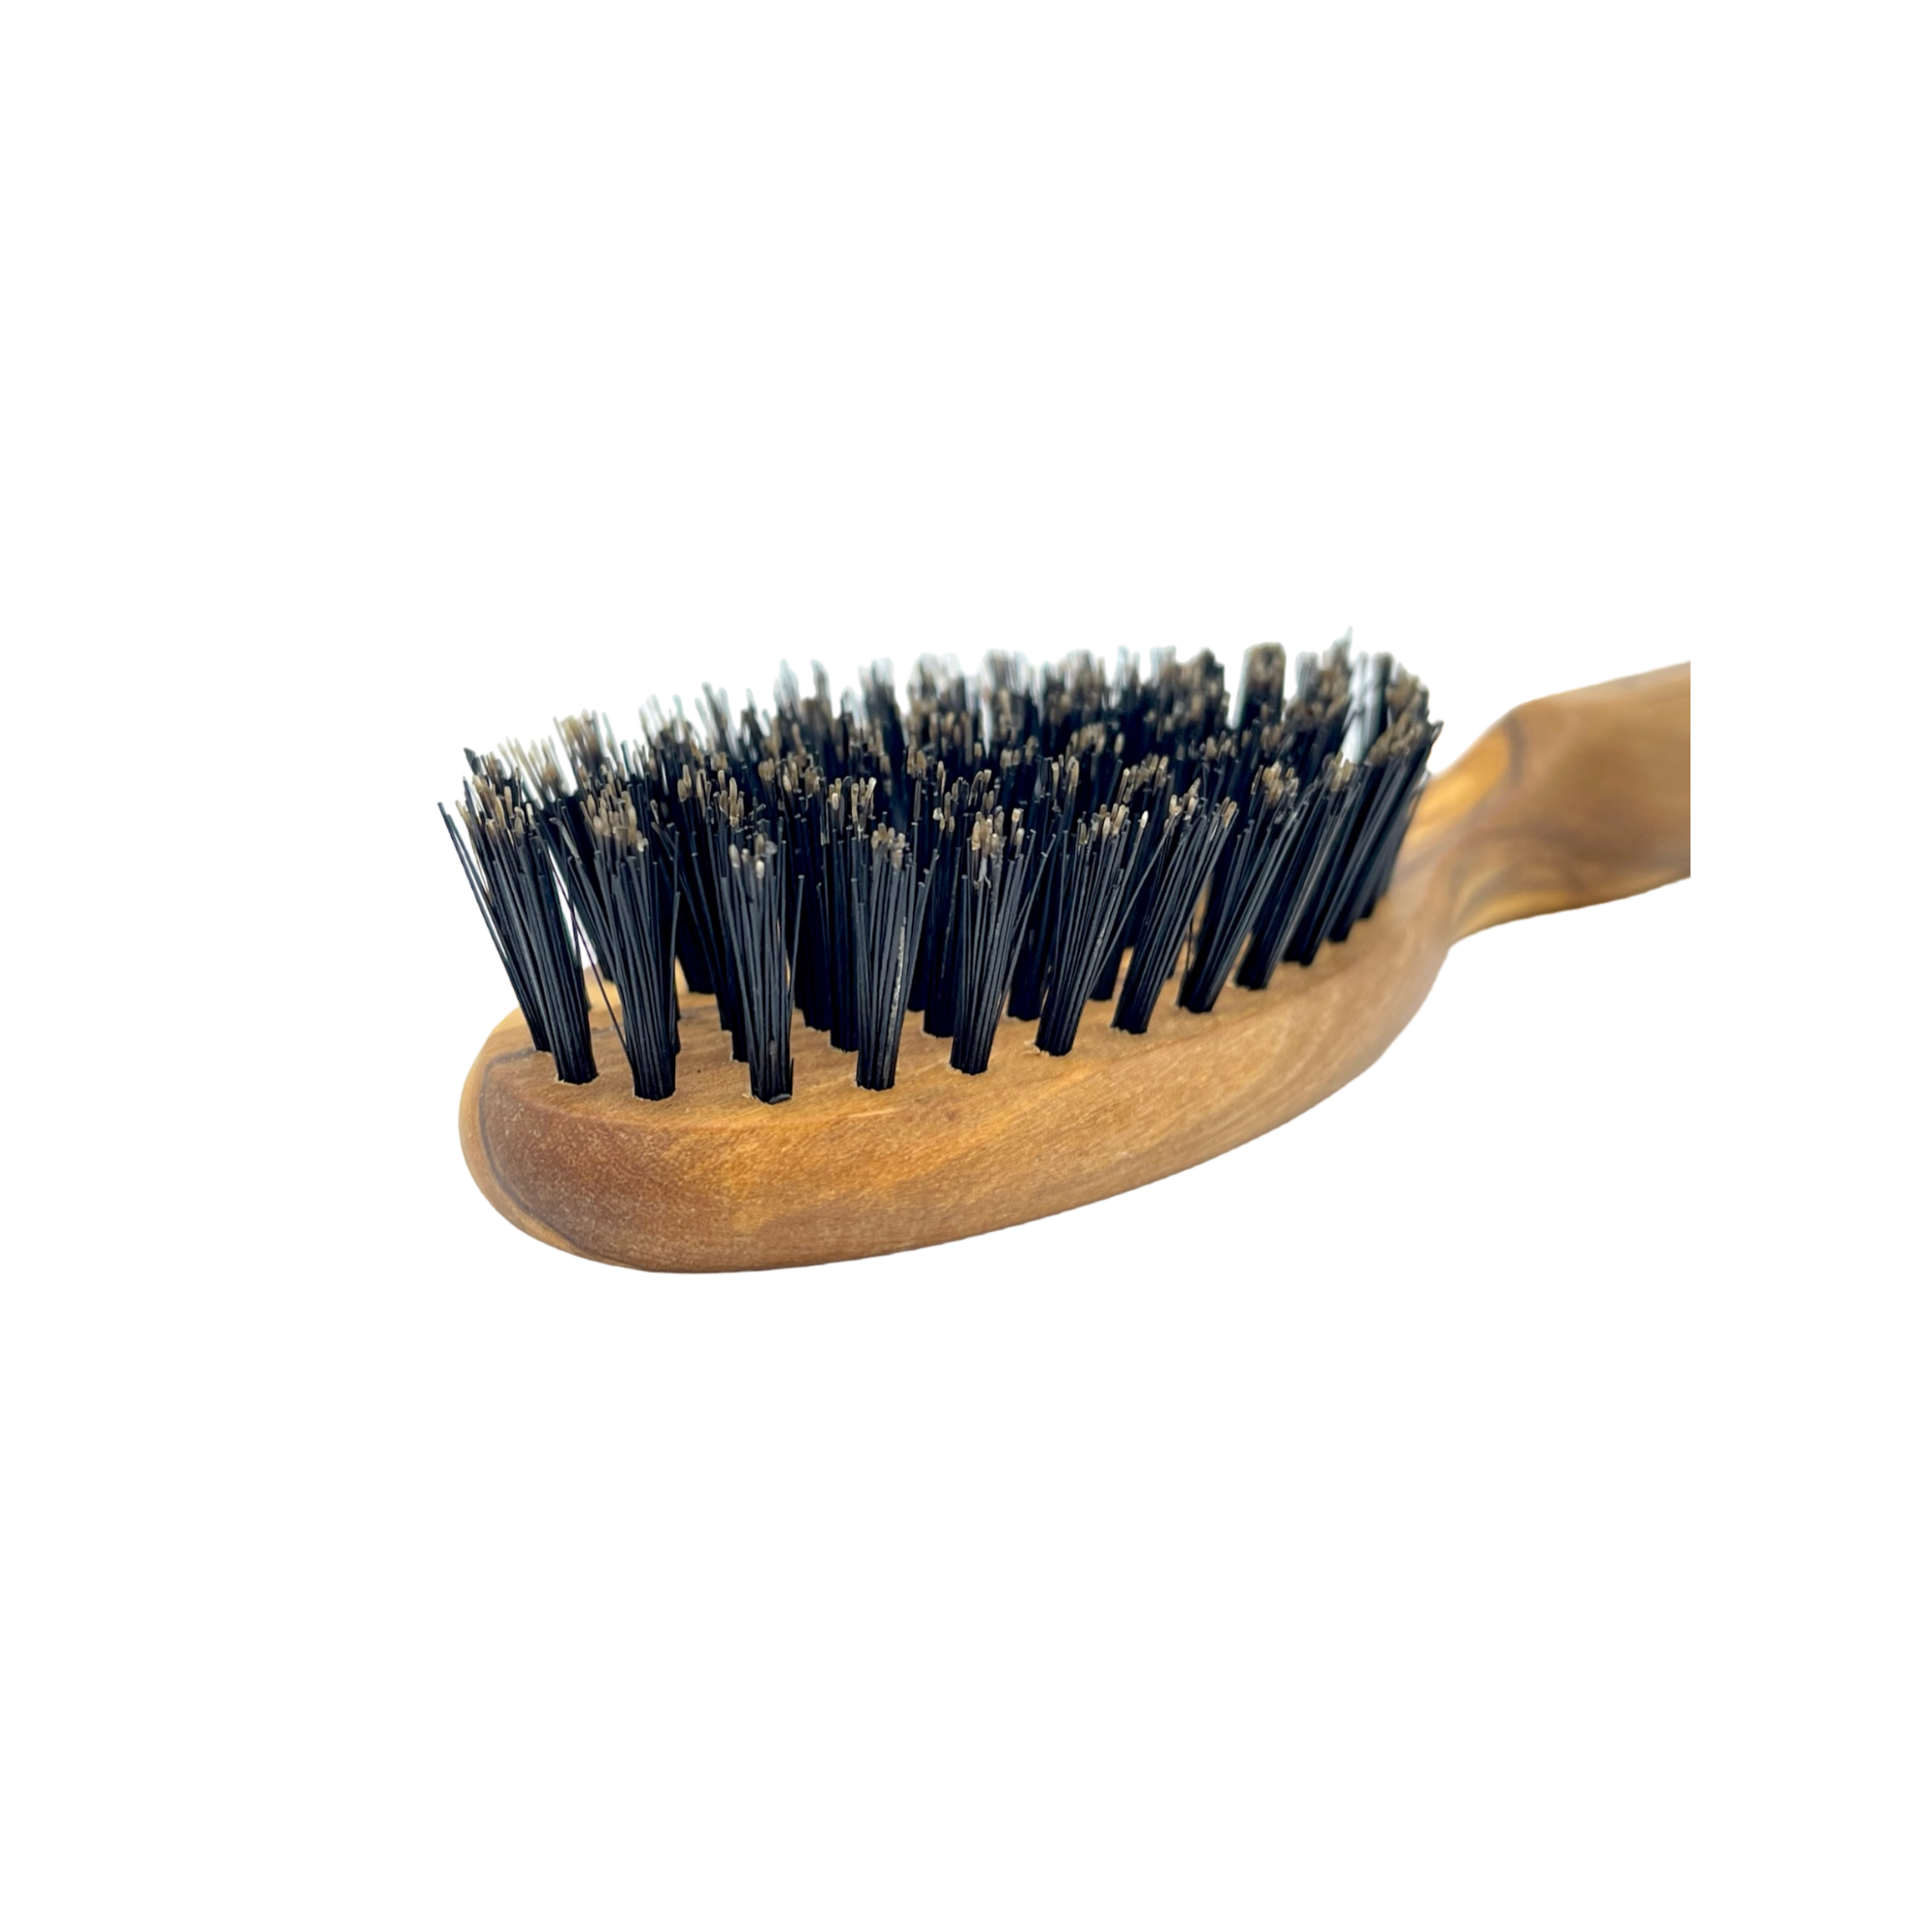 Dural Olive wood hair brush with boar bristles - 7 rows